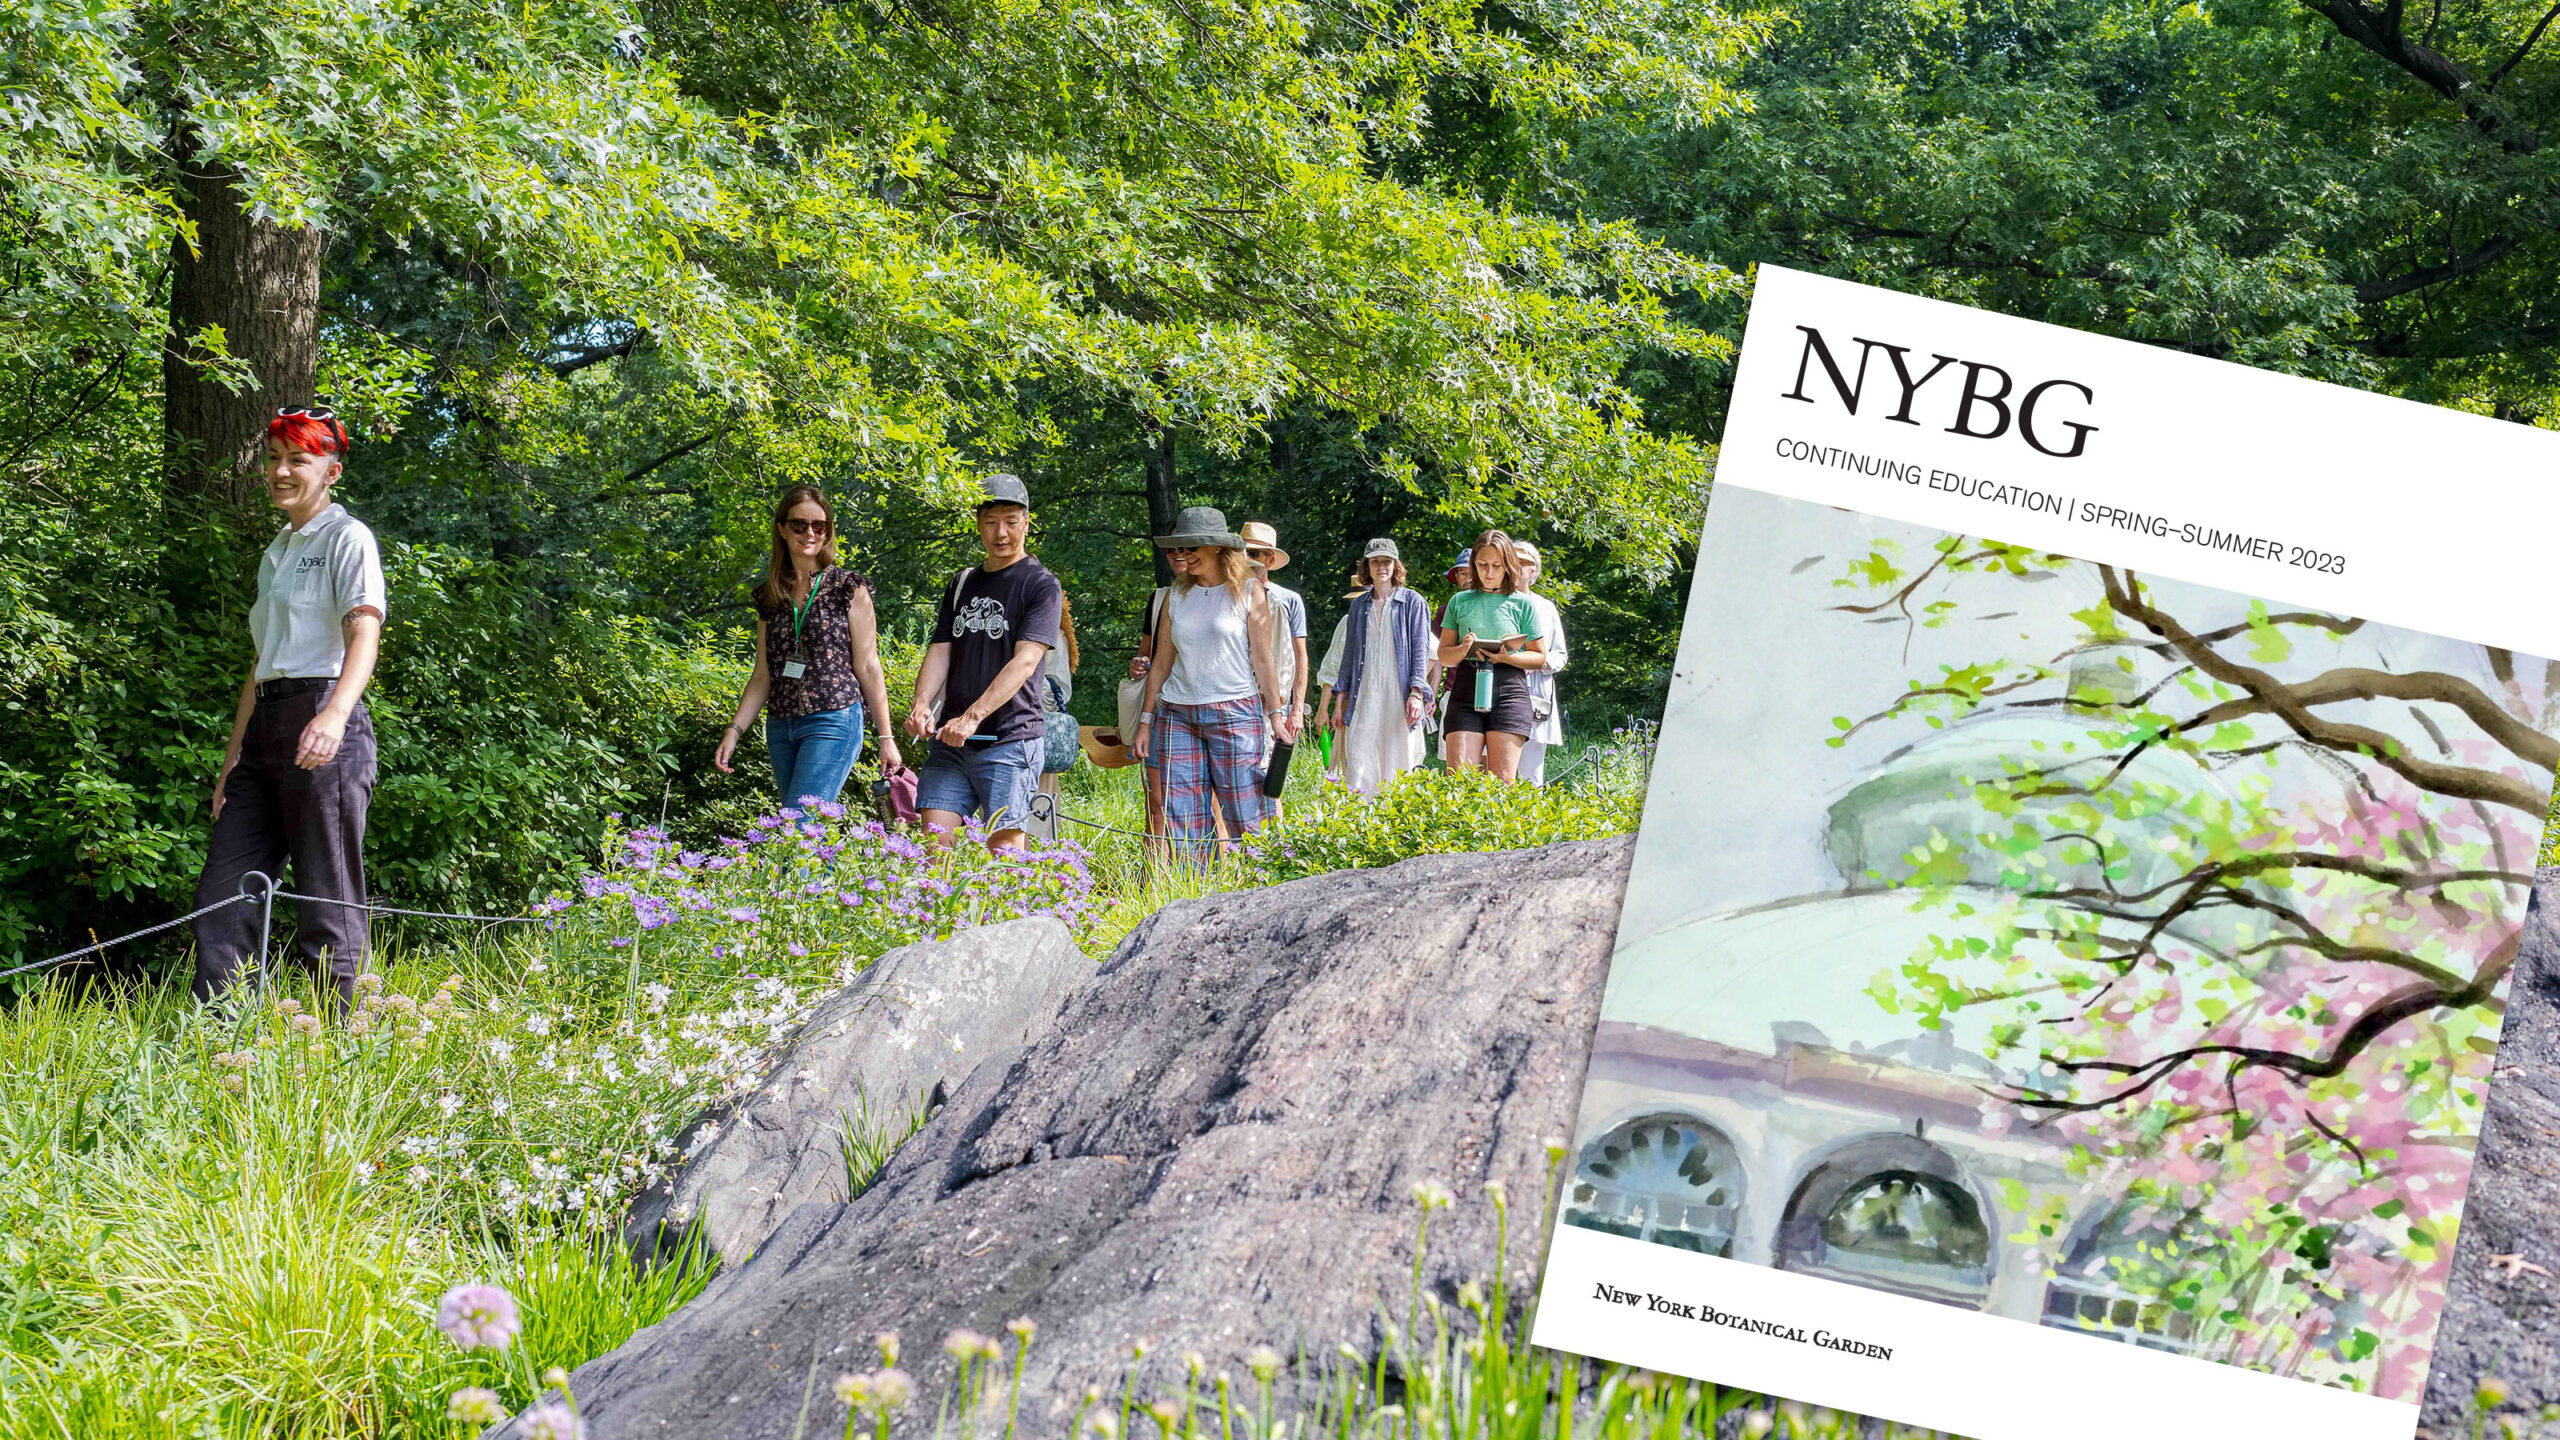 Group of people walking in the distance with grass and trees with a large rock in the foreground. A cover of the NYBG Continuing Education Spring Summer Catalog is in the front of right corner.